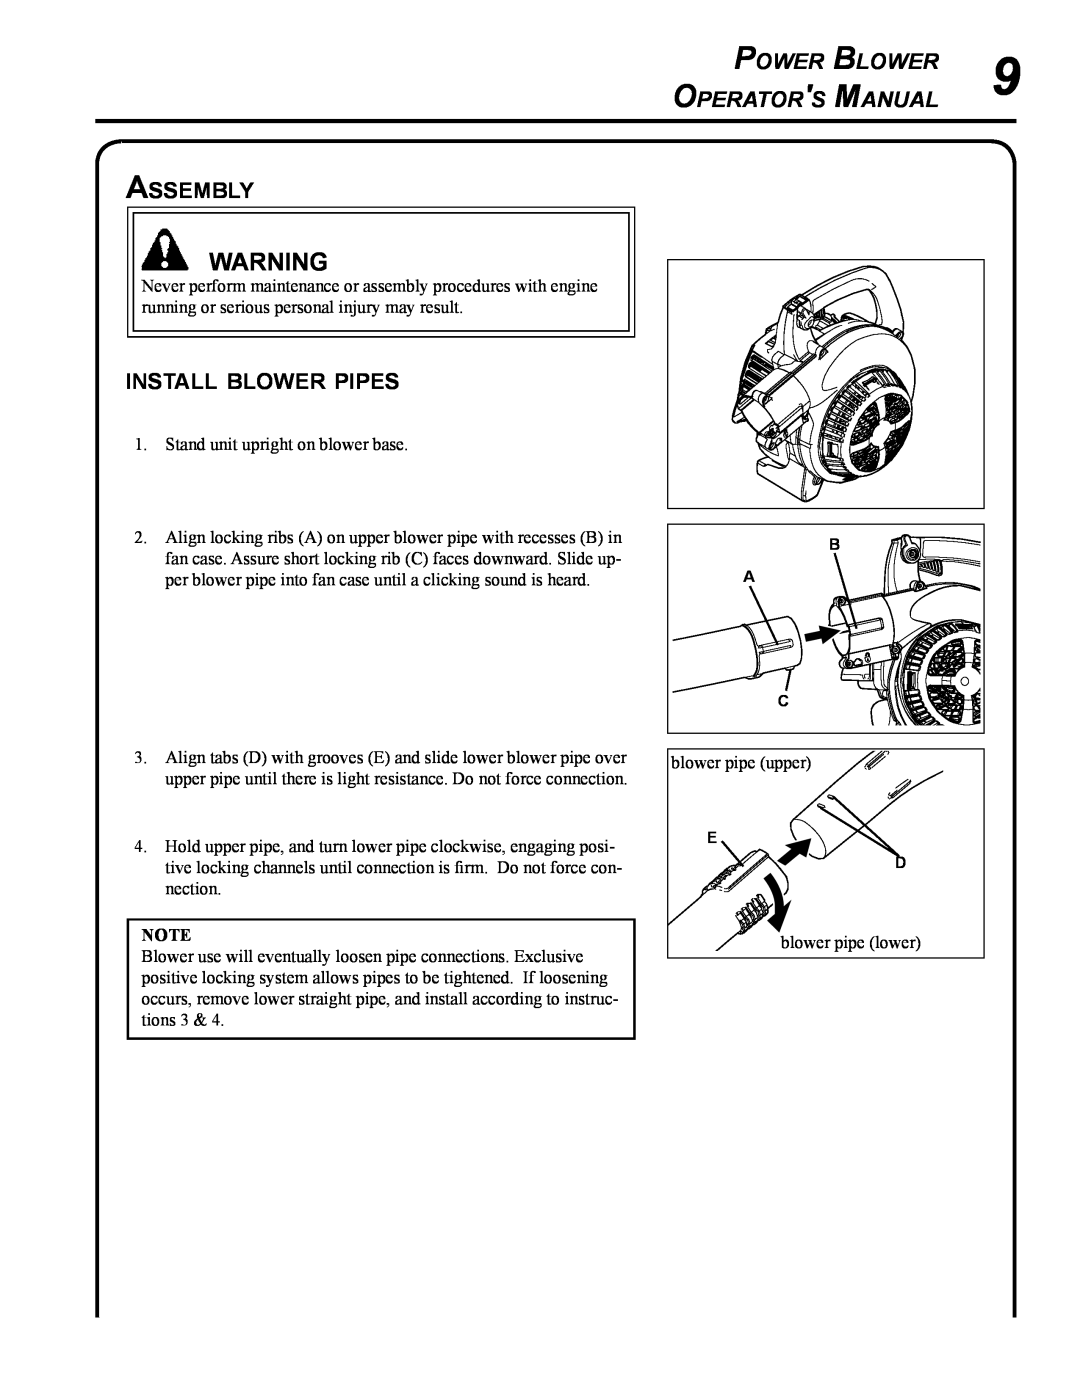 Echo PB-250 manual Assembly, install blower pipes, Power Blower, Operator s Manual 